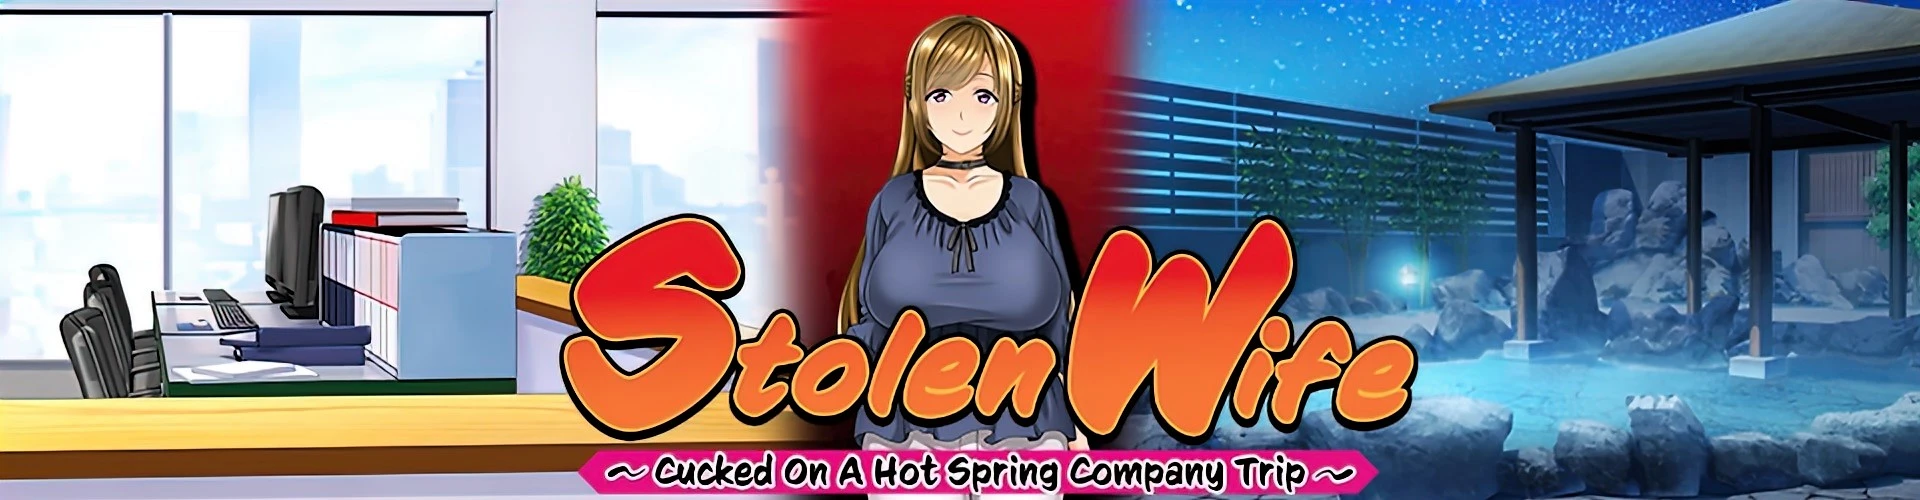 Stolen Wife ~Cucked On A Hot Spring Company Trip~ main image